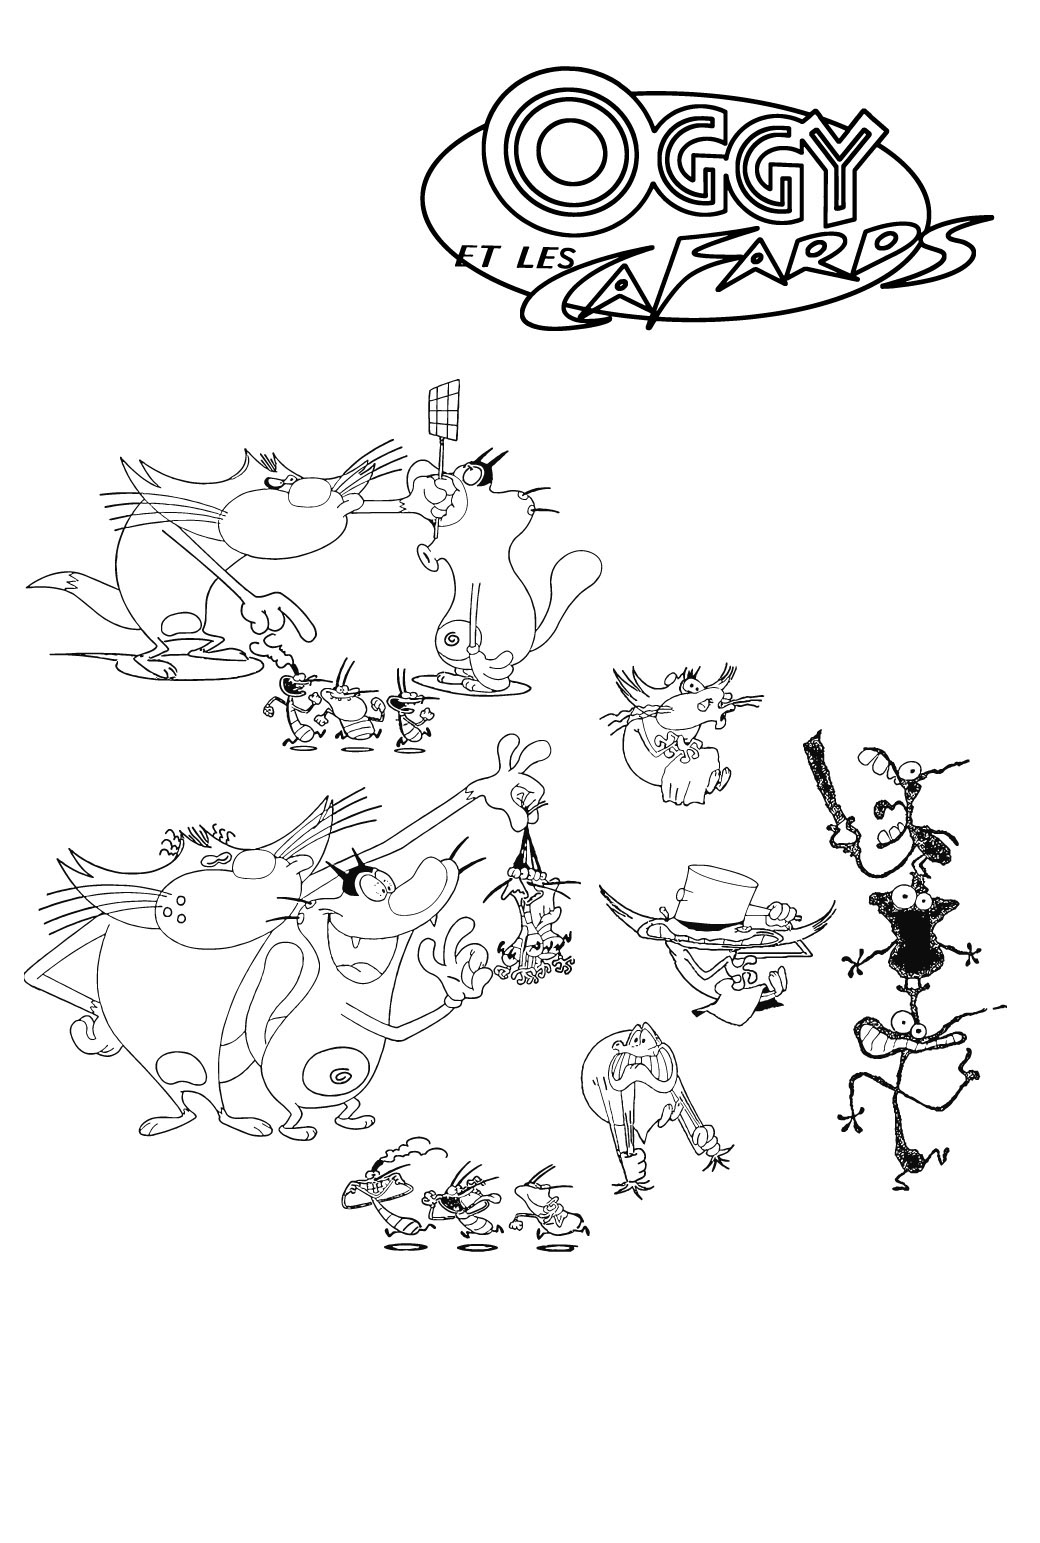 Oggy And The Cockroaches Free coloring page